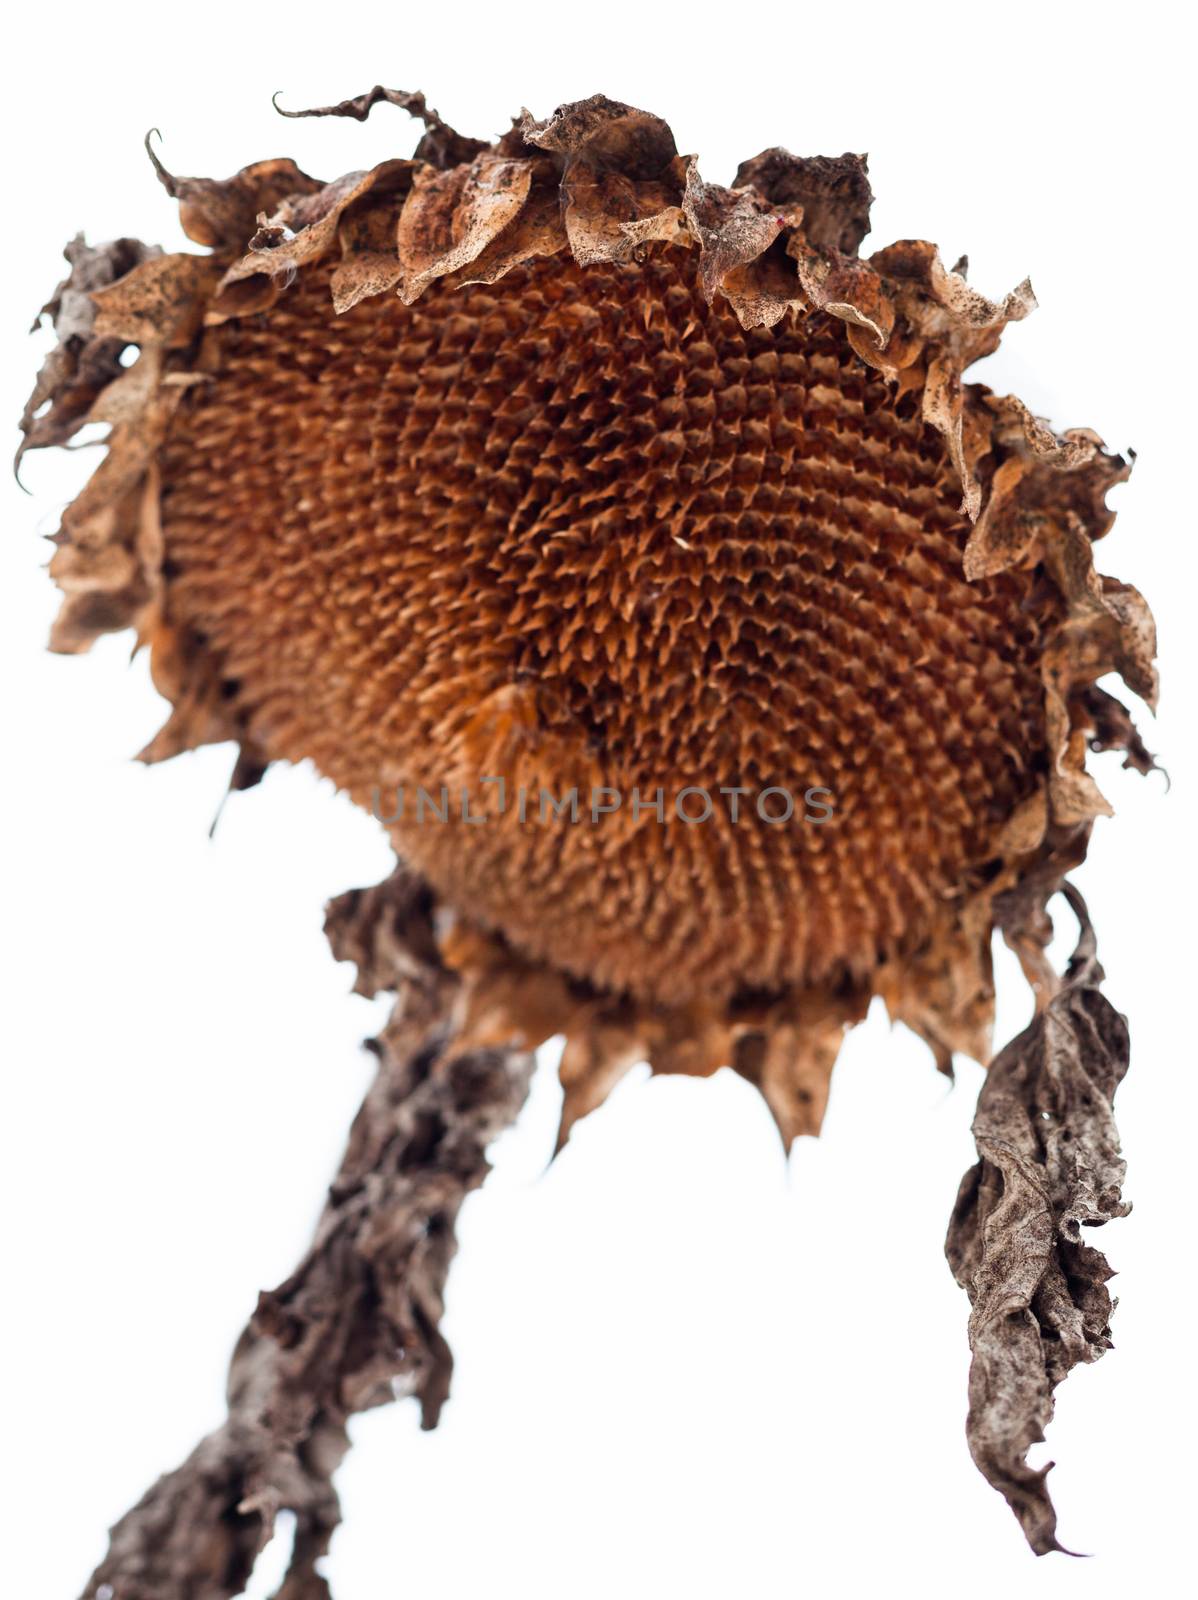 Withered sunflower head in winter by rootstocks